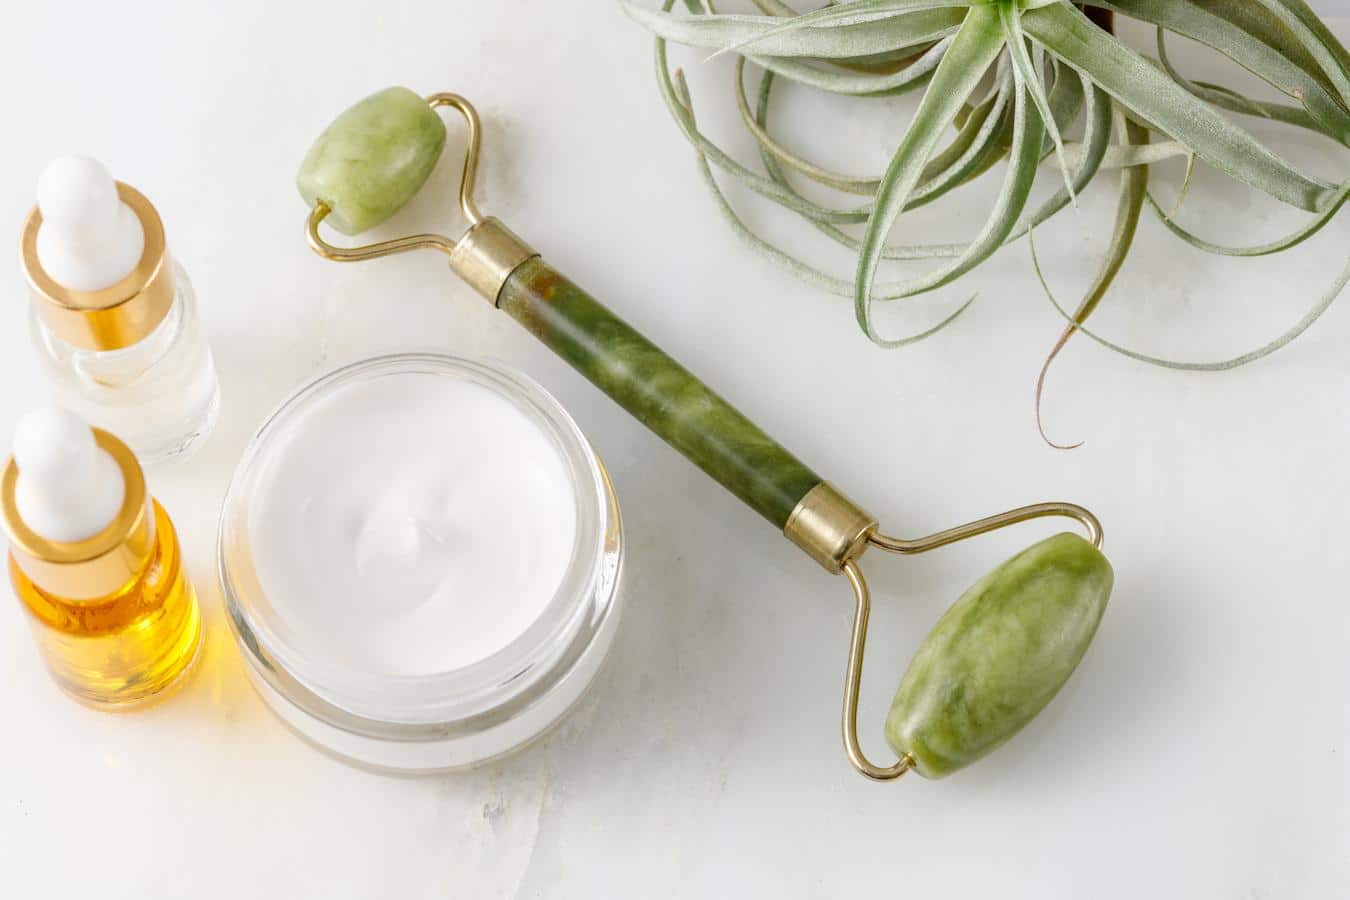 Use a jade roller when you want to increase circulation or minimize wrinkles on your face